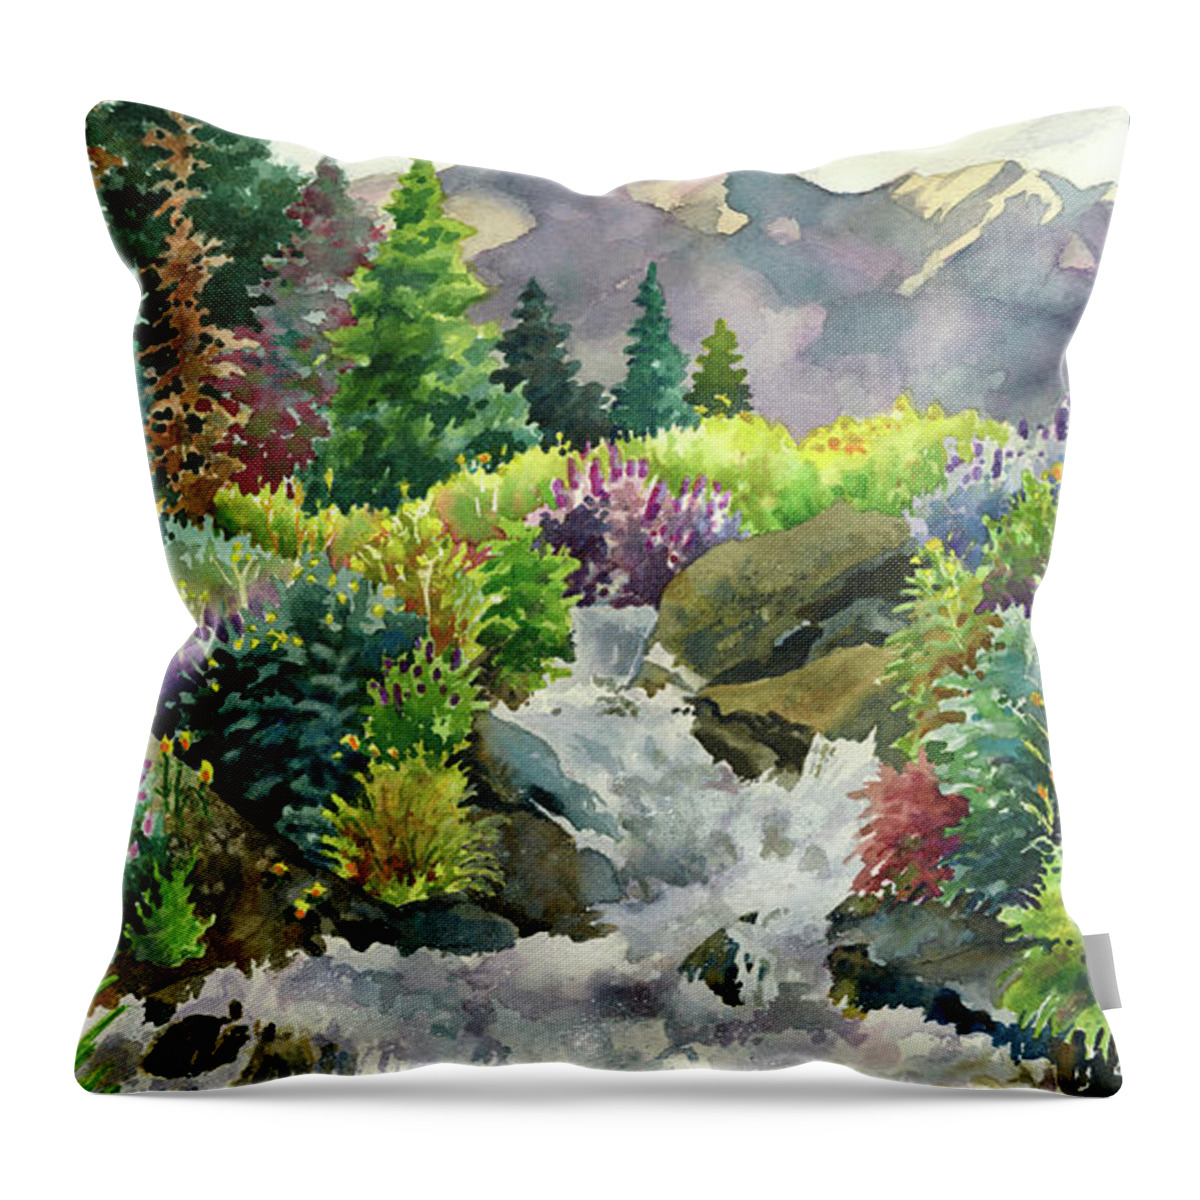  Colorado Art Paintings Throw Pillow featuring the painting Colorado Waterfall by Anne Gifford